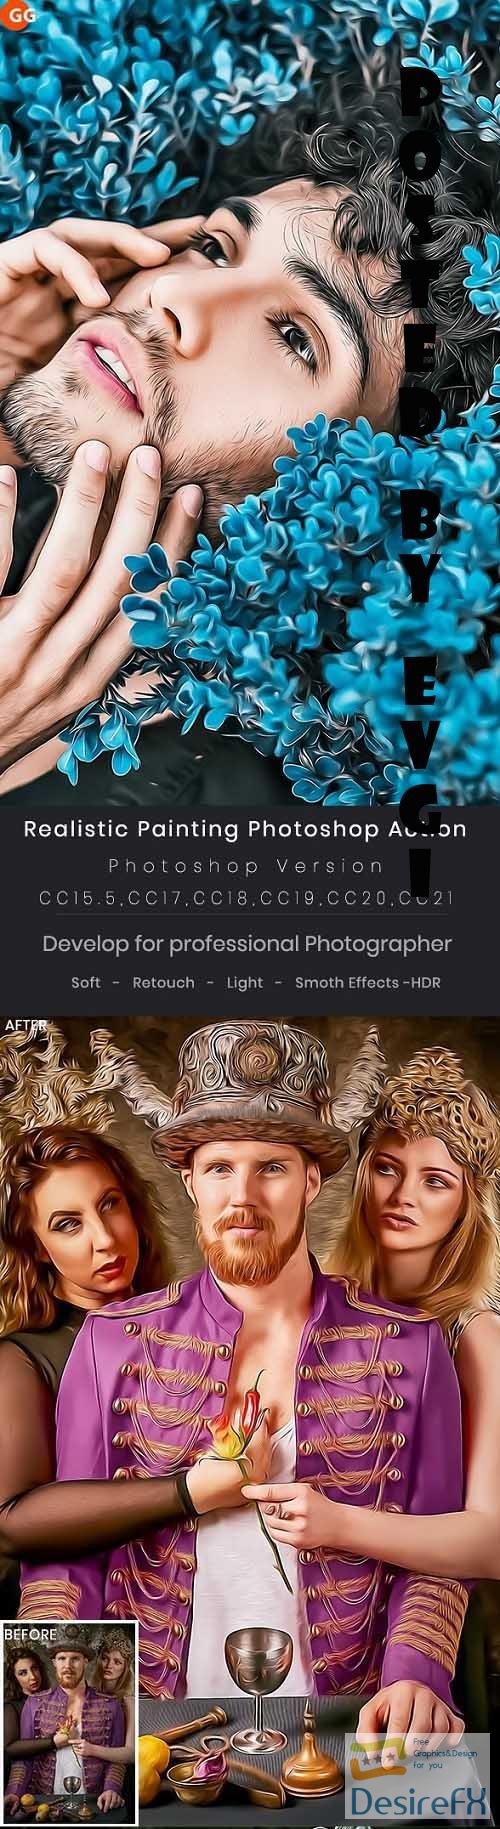 Realistic Painting Photoshop Action - 31434387